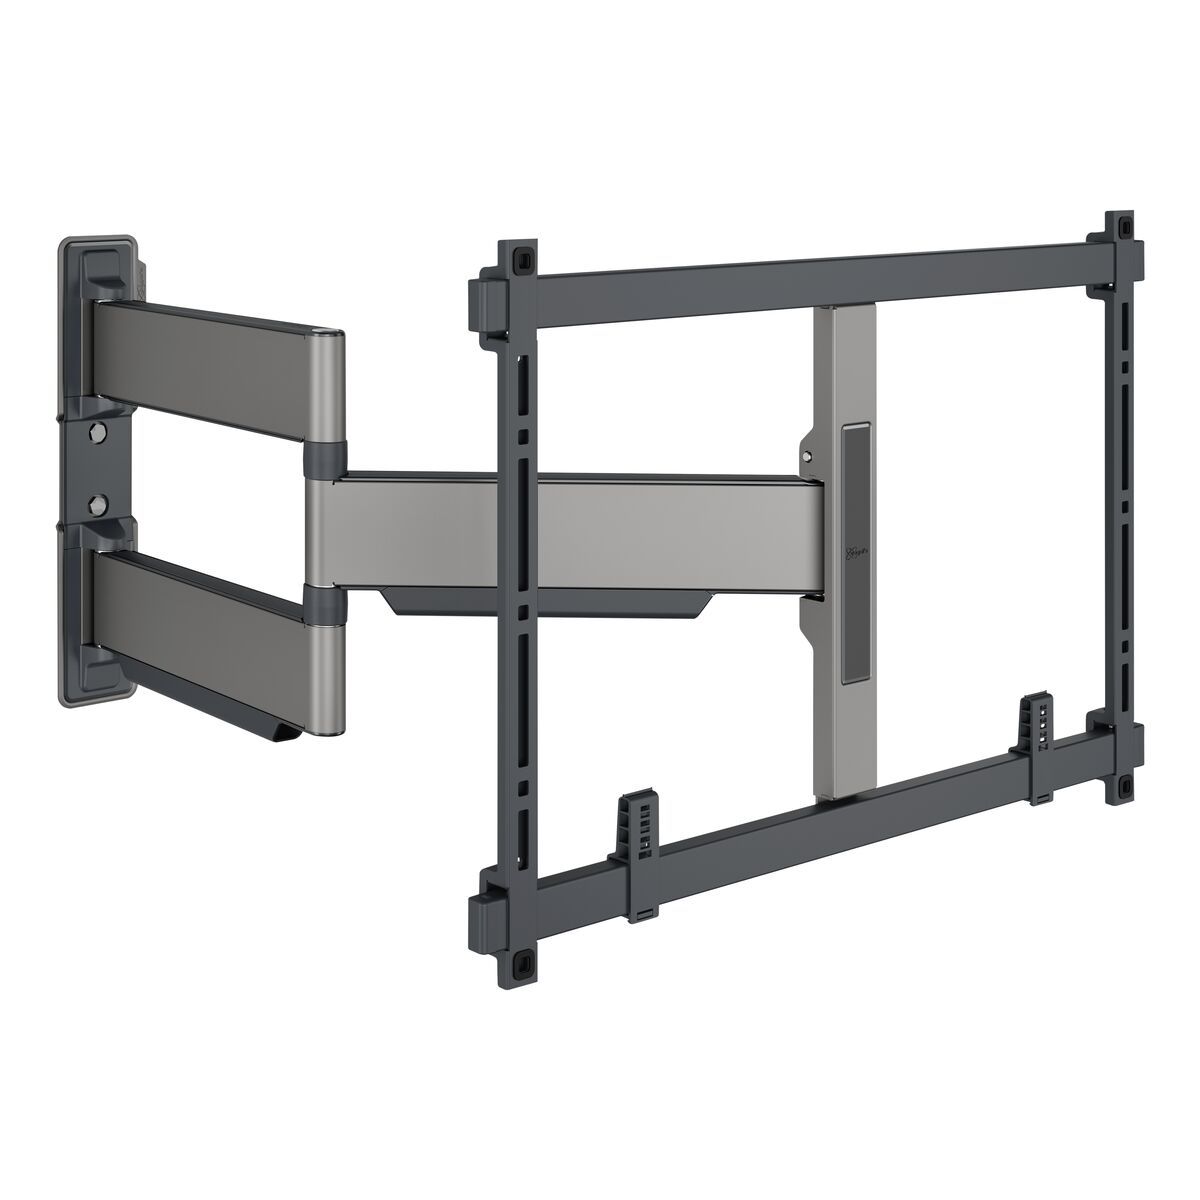 Vogel's TVM 5645 Full-Motion TV Wall Mount (black) - Suitable for 40 up to 77 inch TVs - Full motion (up to 180°) swivel - Product